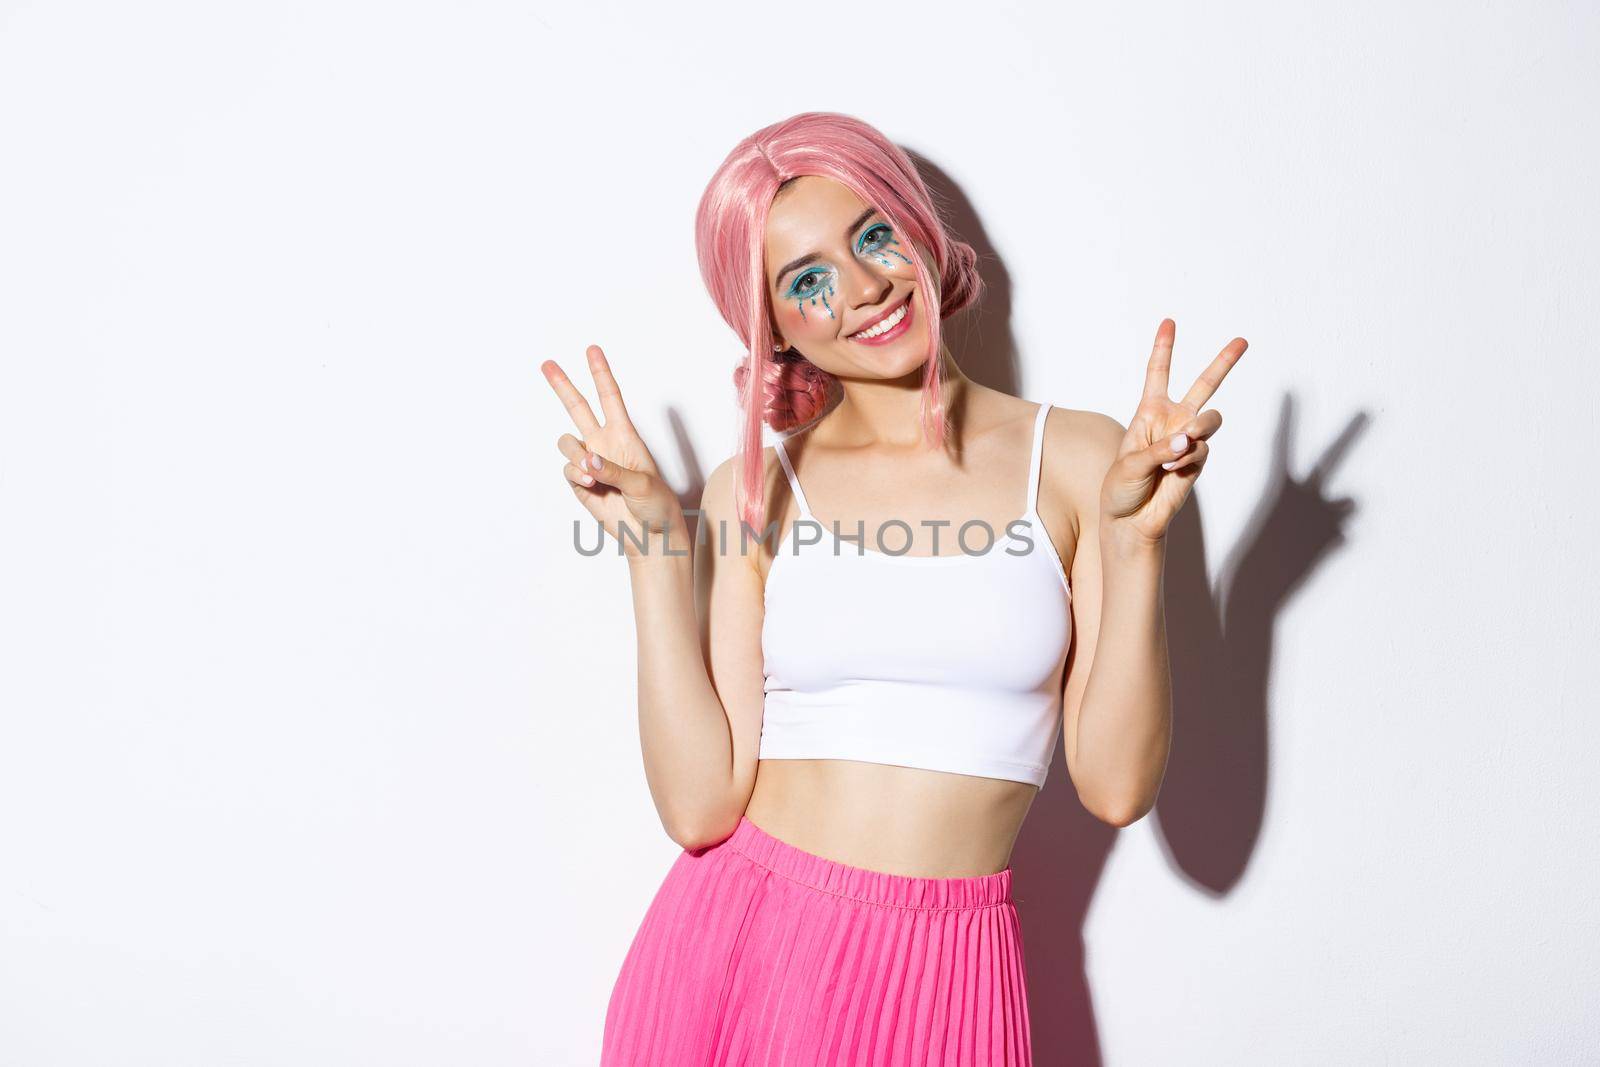 Beautiful girl with lovely smile, showing peace signs, wearing pink wig and halloween makeup, standing over white background.